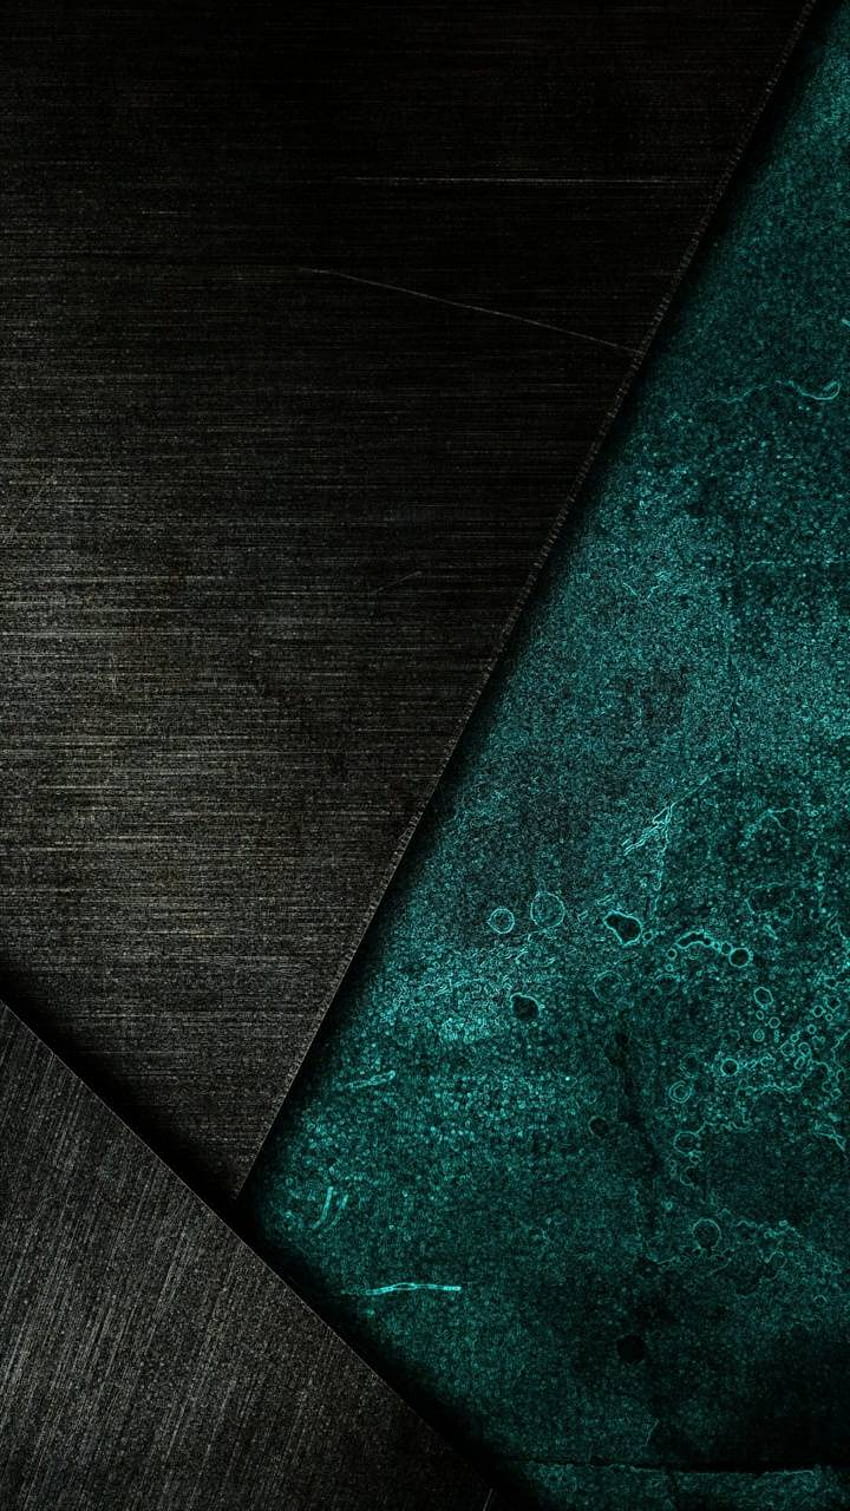 Black, dark, grey rays background abstract design texture. high resolution  wallpaper. | CanStock